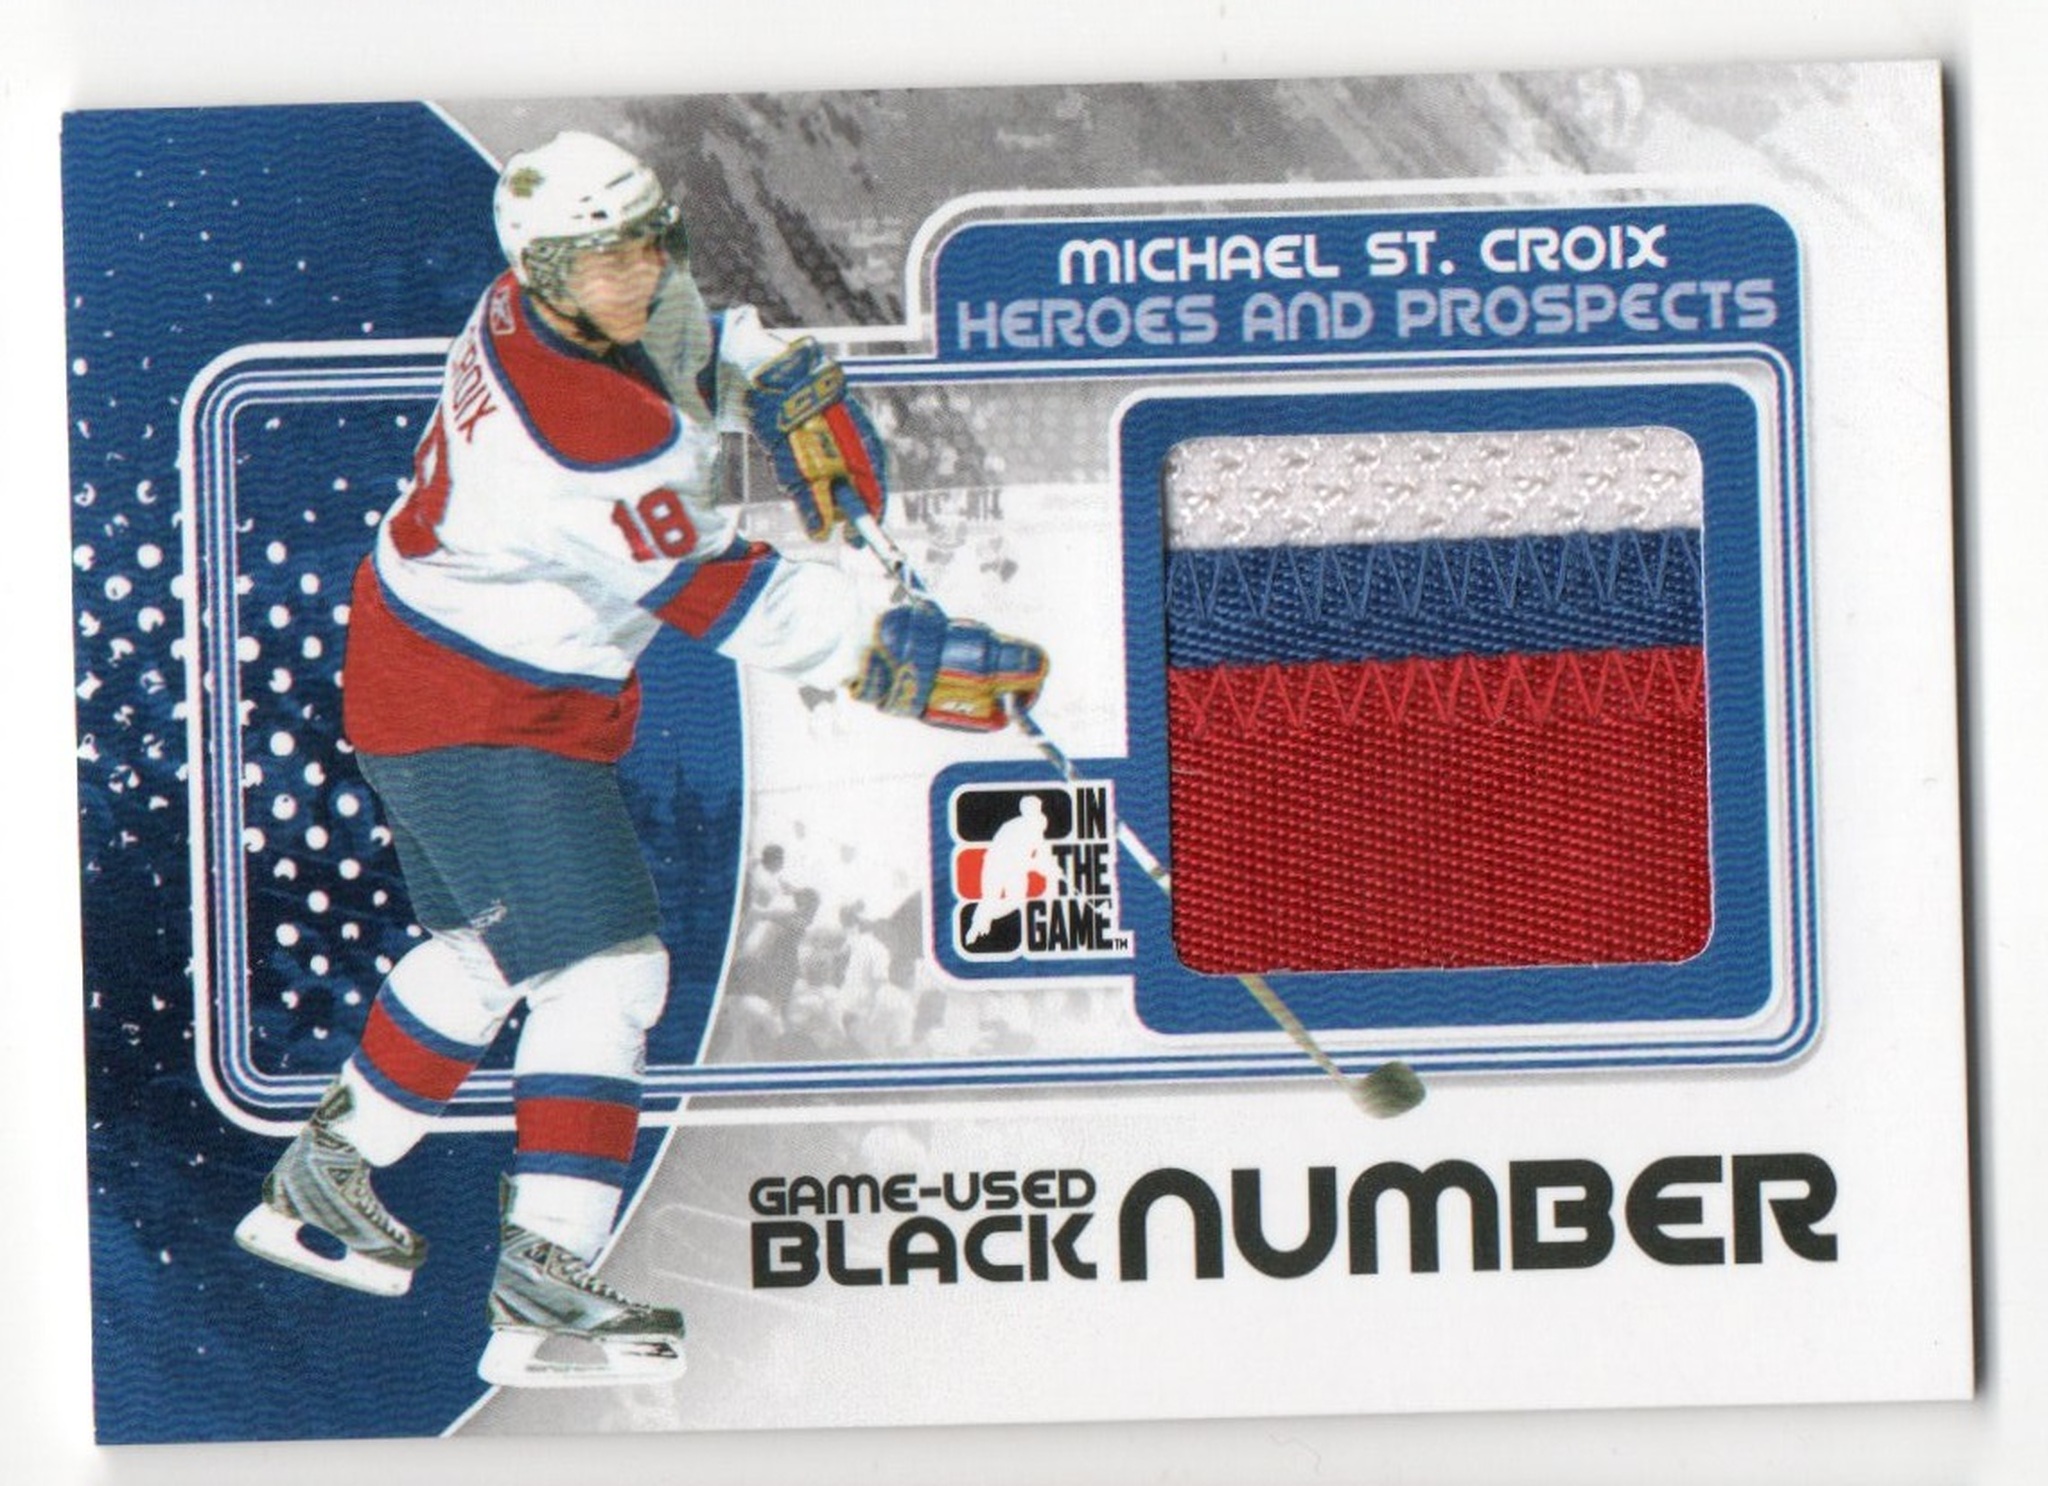 2010-11 ITG Heroes and Prospects Game Used Numbers Black #M31 Michael St. Croix (80-X332-RANGERS)